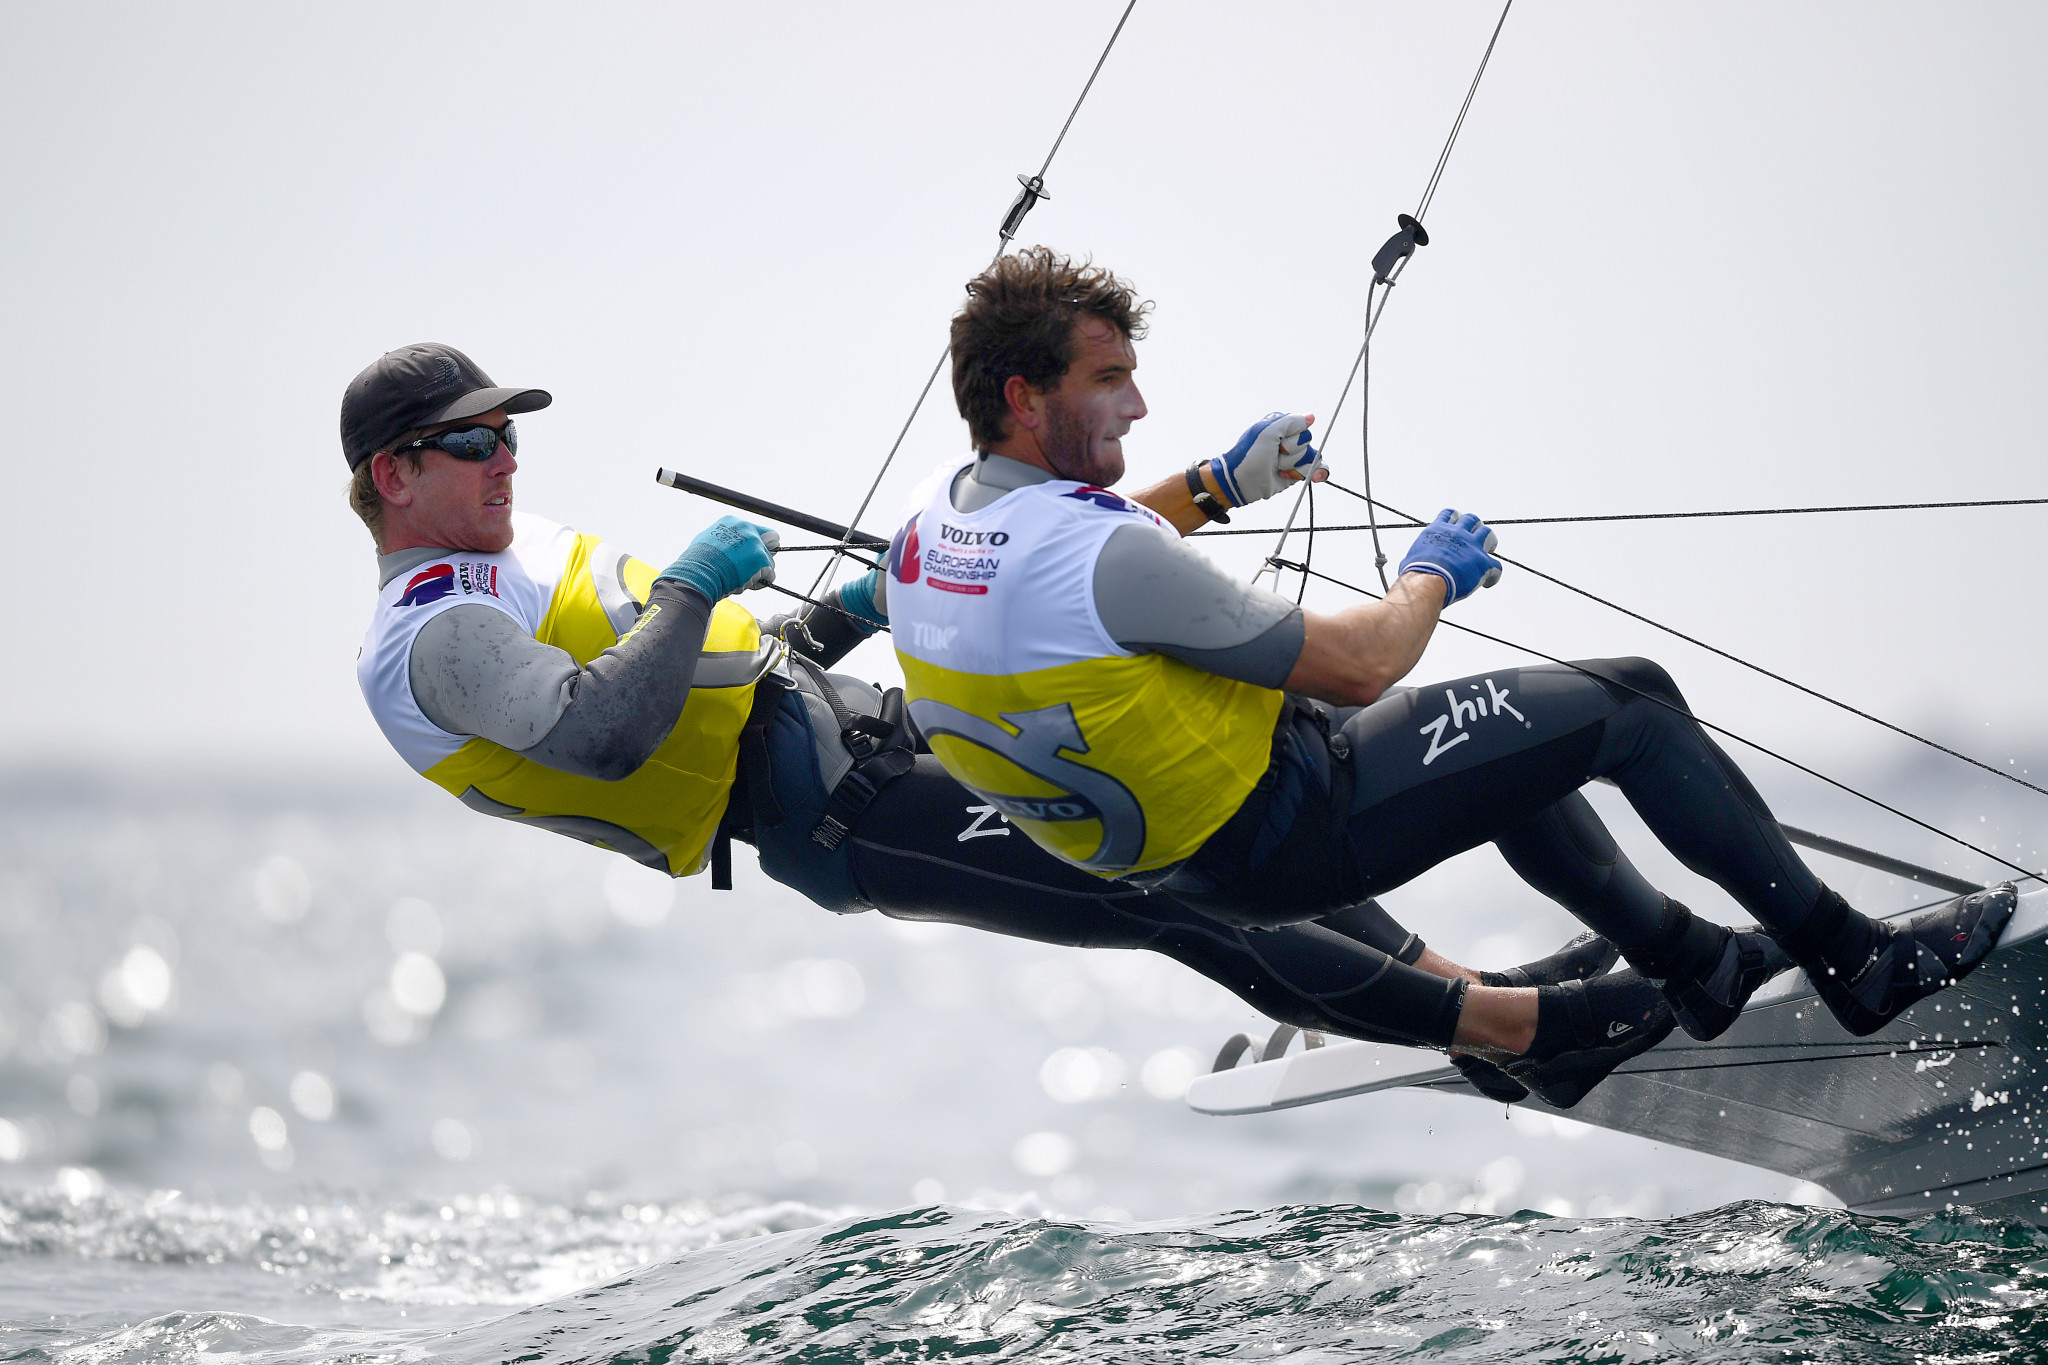 New Zealand's Rio 2016 49er gold medallists have taken the lead in the World Championships on the home water of Auckland ©Getty Images